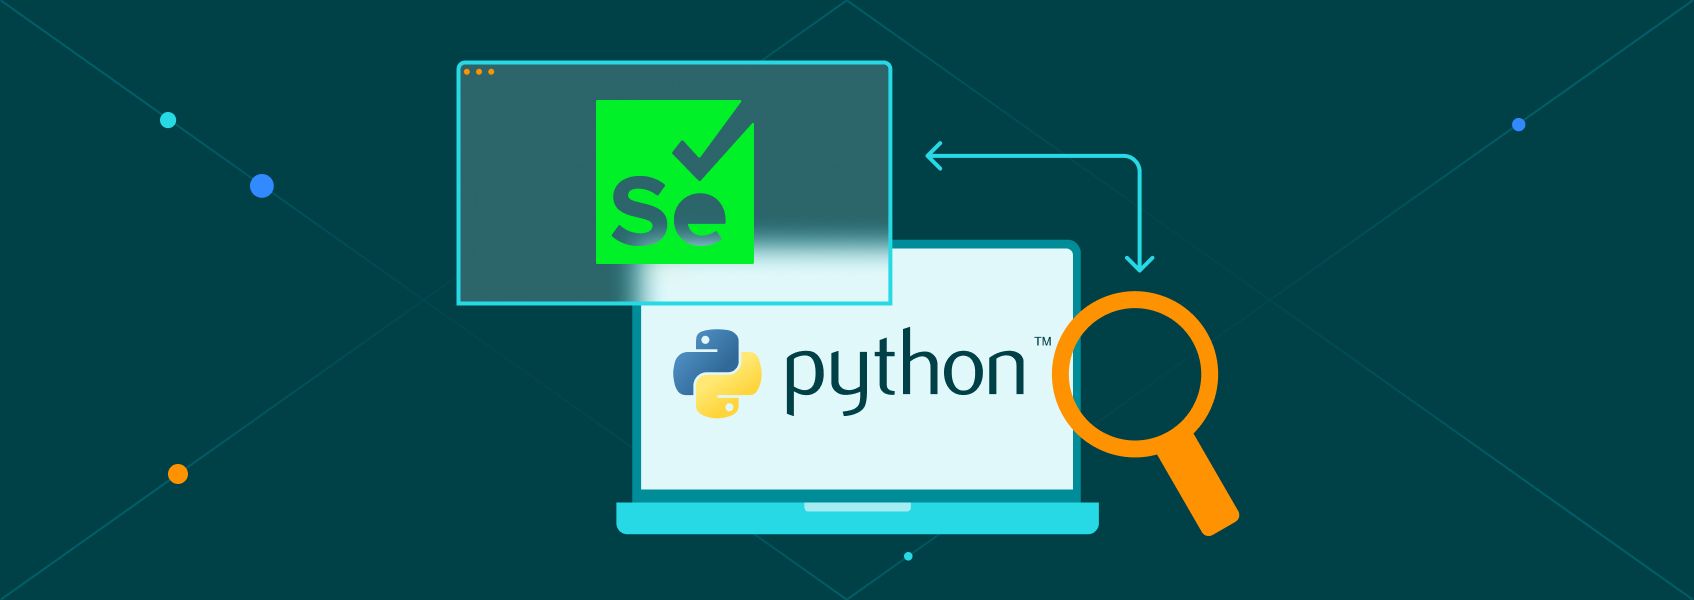 Web Scraping With Selenium and Python